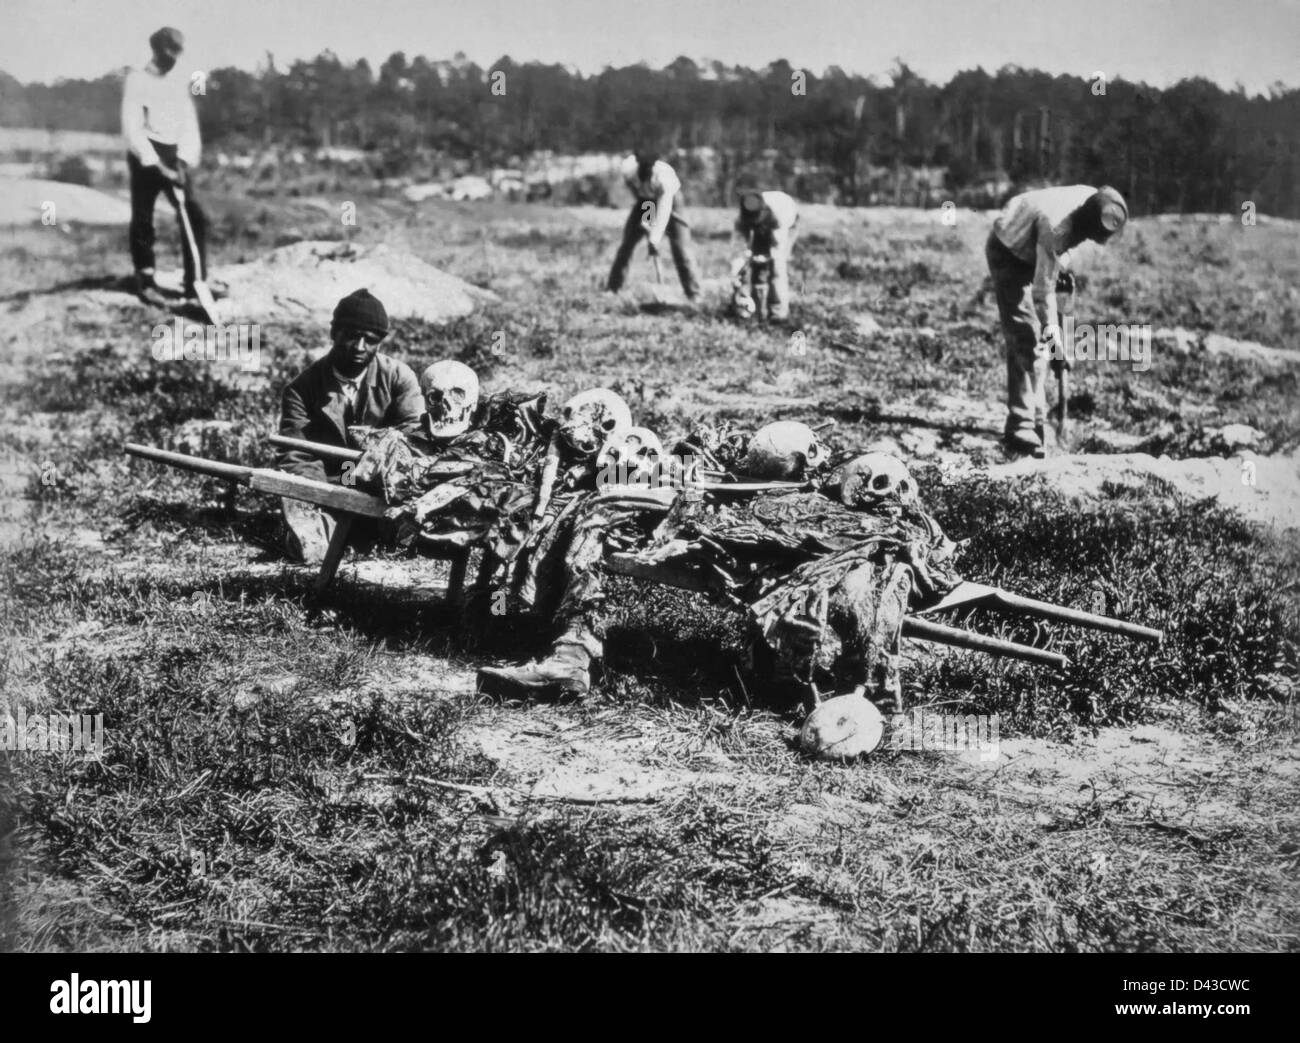 Black slaves burying dead soldiers following the battle of Cold Harbor, Virginia June 14, 1864. The battle is one of the bloodiest, most lopsided battles where thousands of Union soldiers were killed or wounded in a hopeless frontal assault against the fortified positions of Confederate Gen. Robert E. Lee's army. Stock Photo